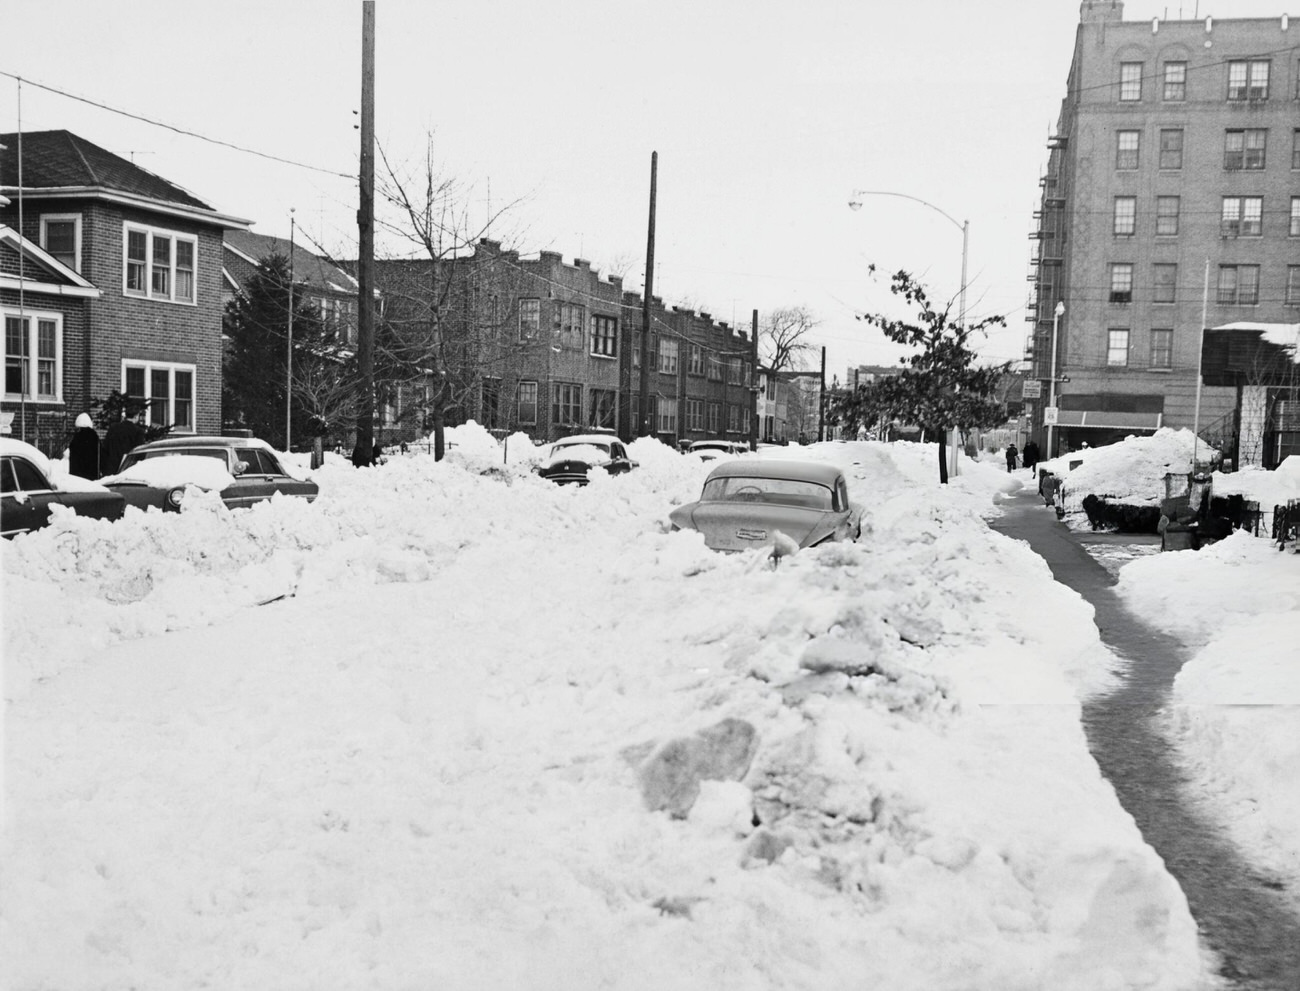 Mounds Of Snow Partly Bury Cars On An Unplowed Street In The Bronx, New York City, During A Blizzard In 1961